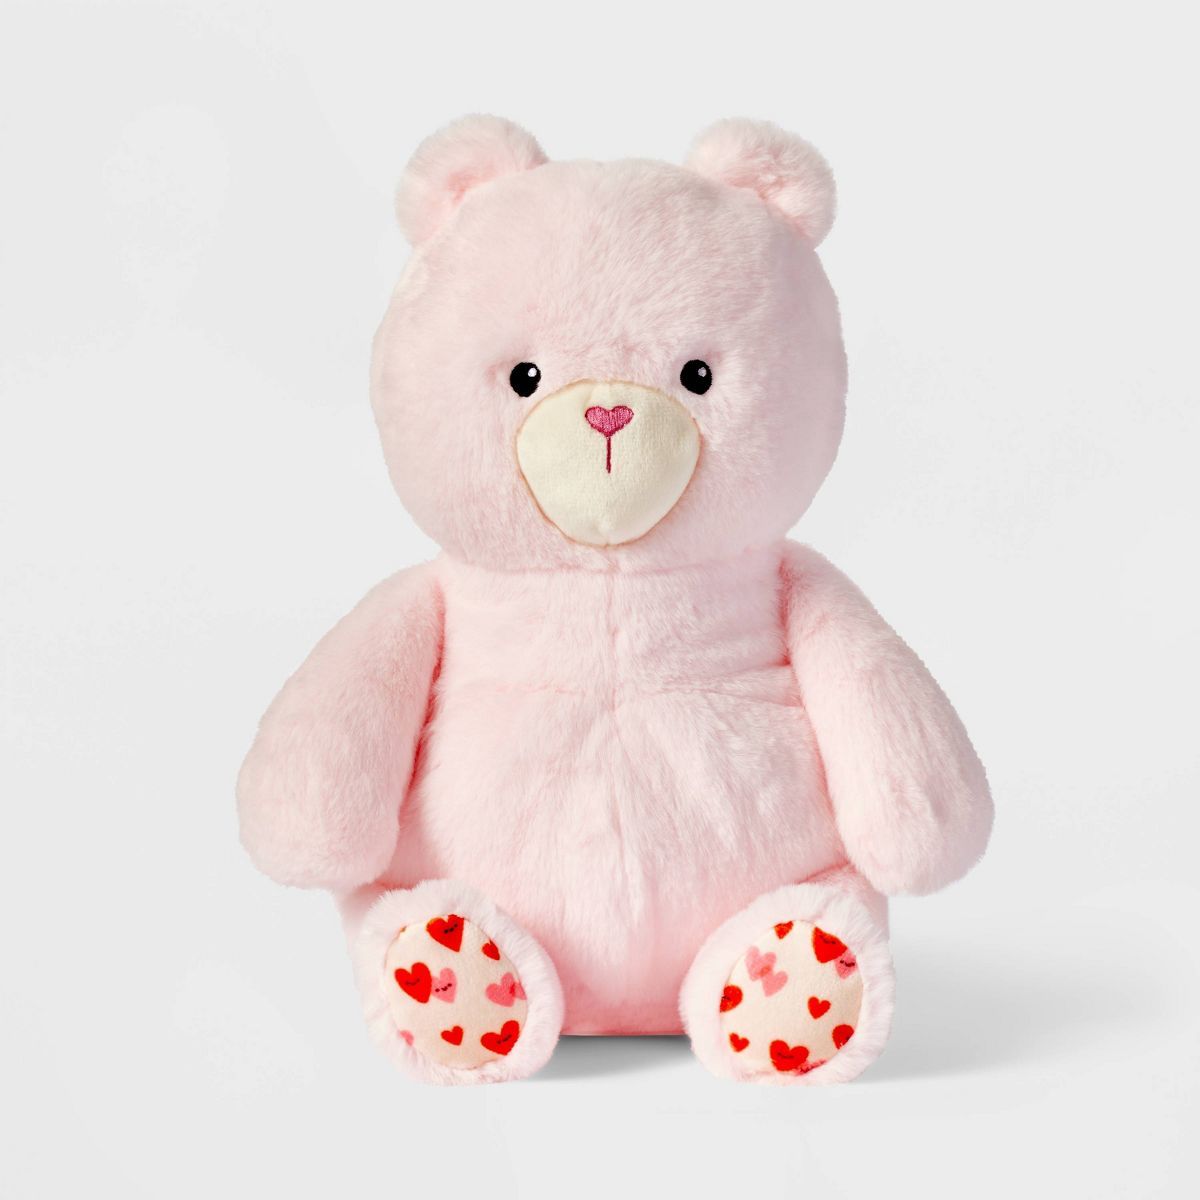 12'' Pink Bear Stuffed Animal with Heart Shaped Nose - Gigglescape™ | Target